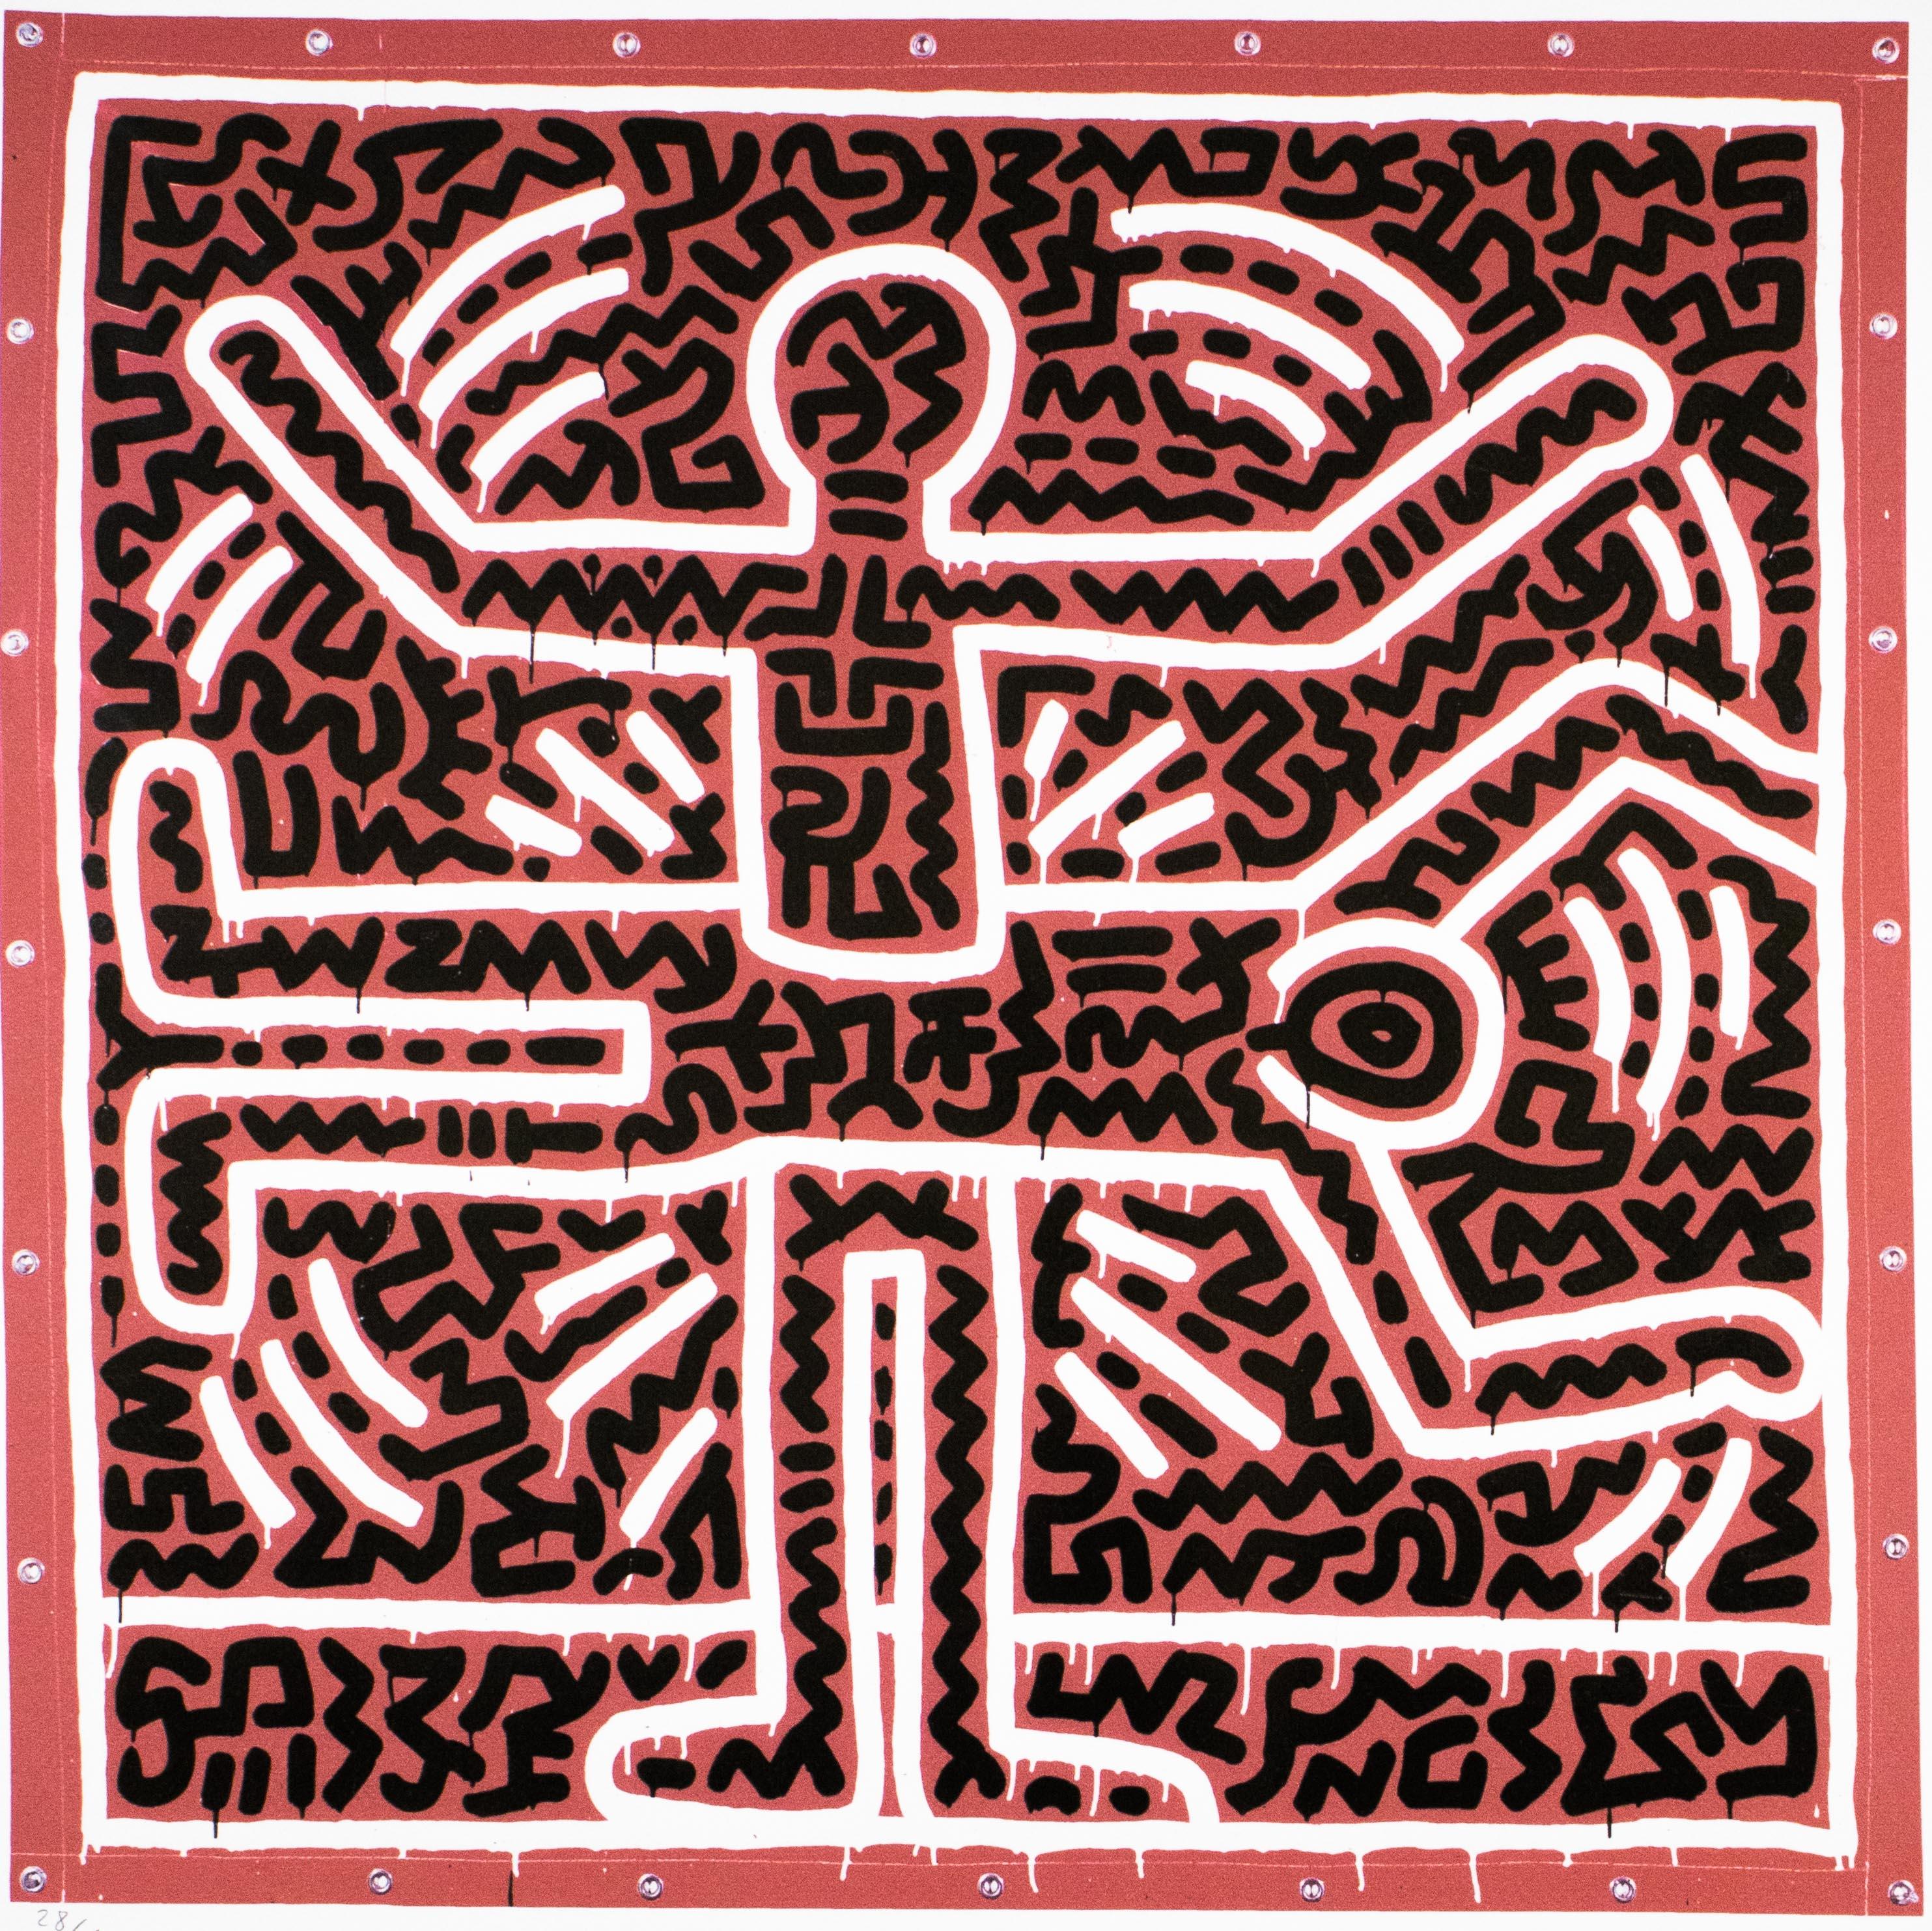 Lithographie - Édition limitée 28/150 - Keith Haring Foundation Inc.